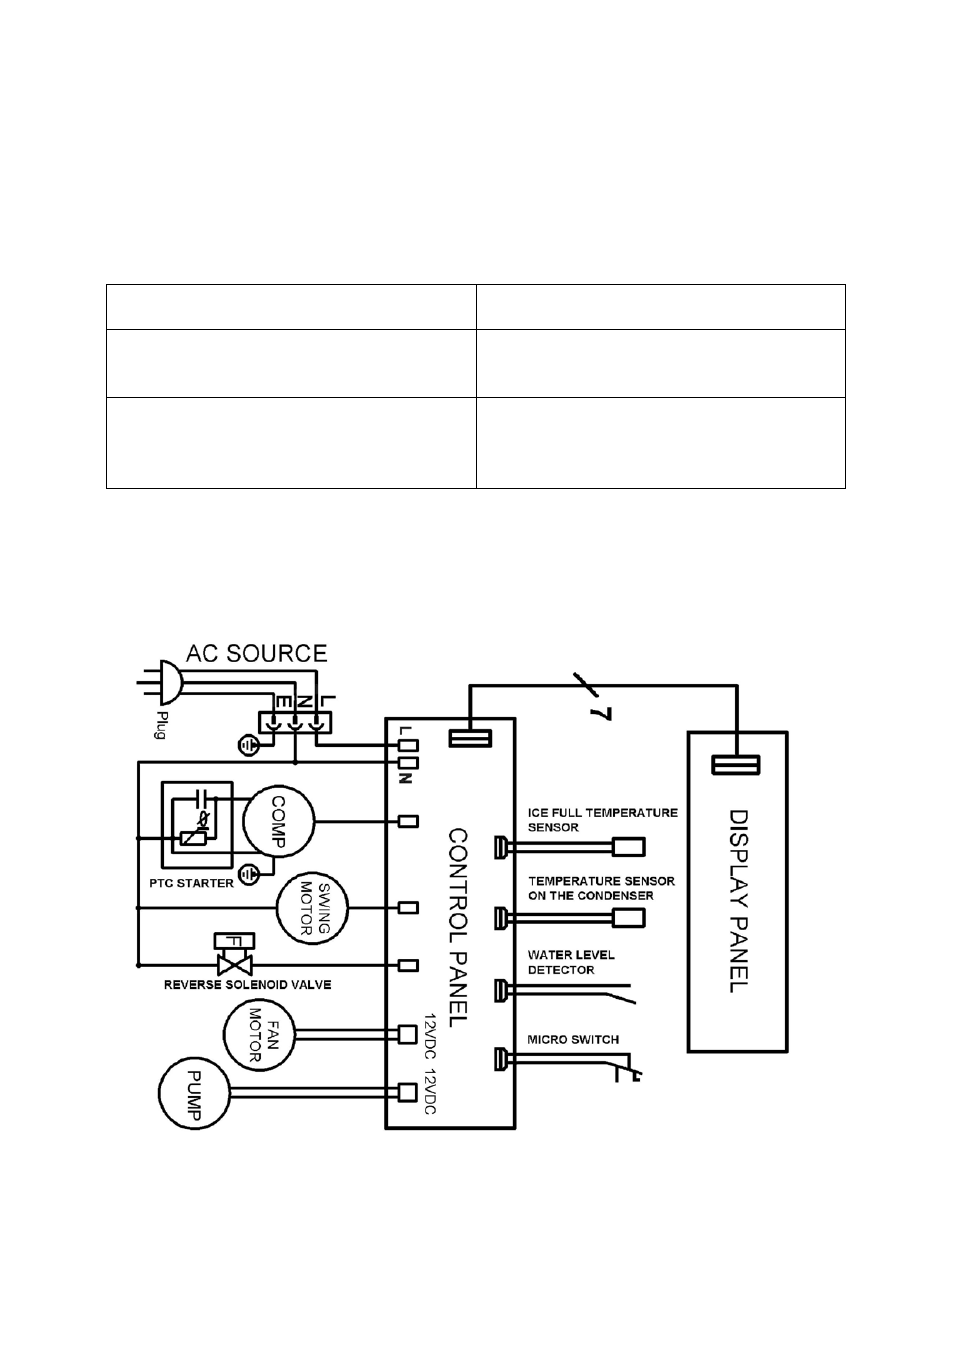 Service for your ice maker, Wiring diagram | Avanti PIM 25 SS User Manual | Page 13 / 22